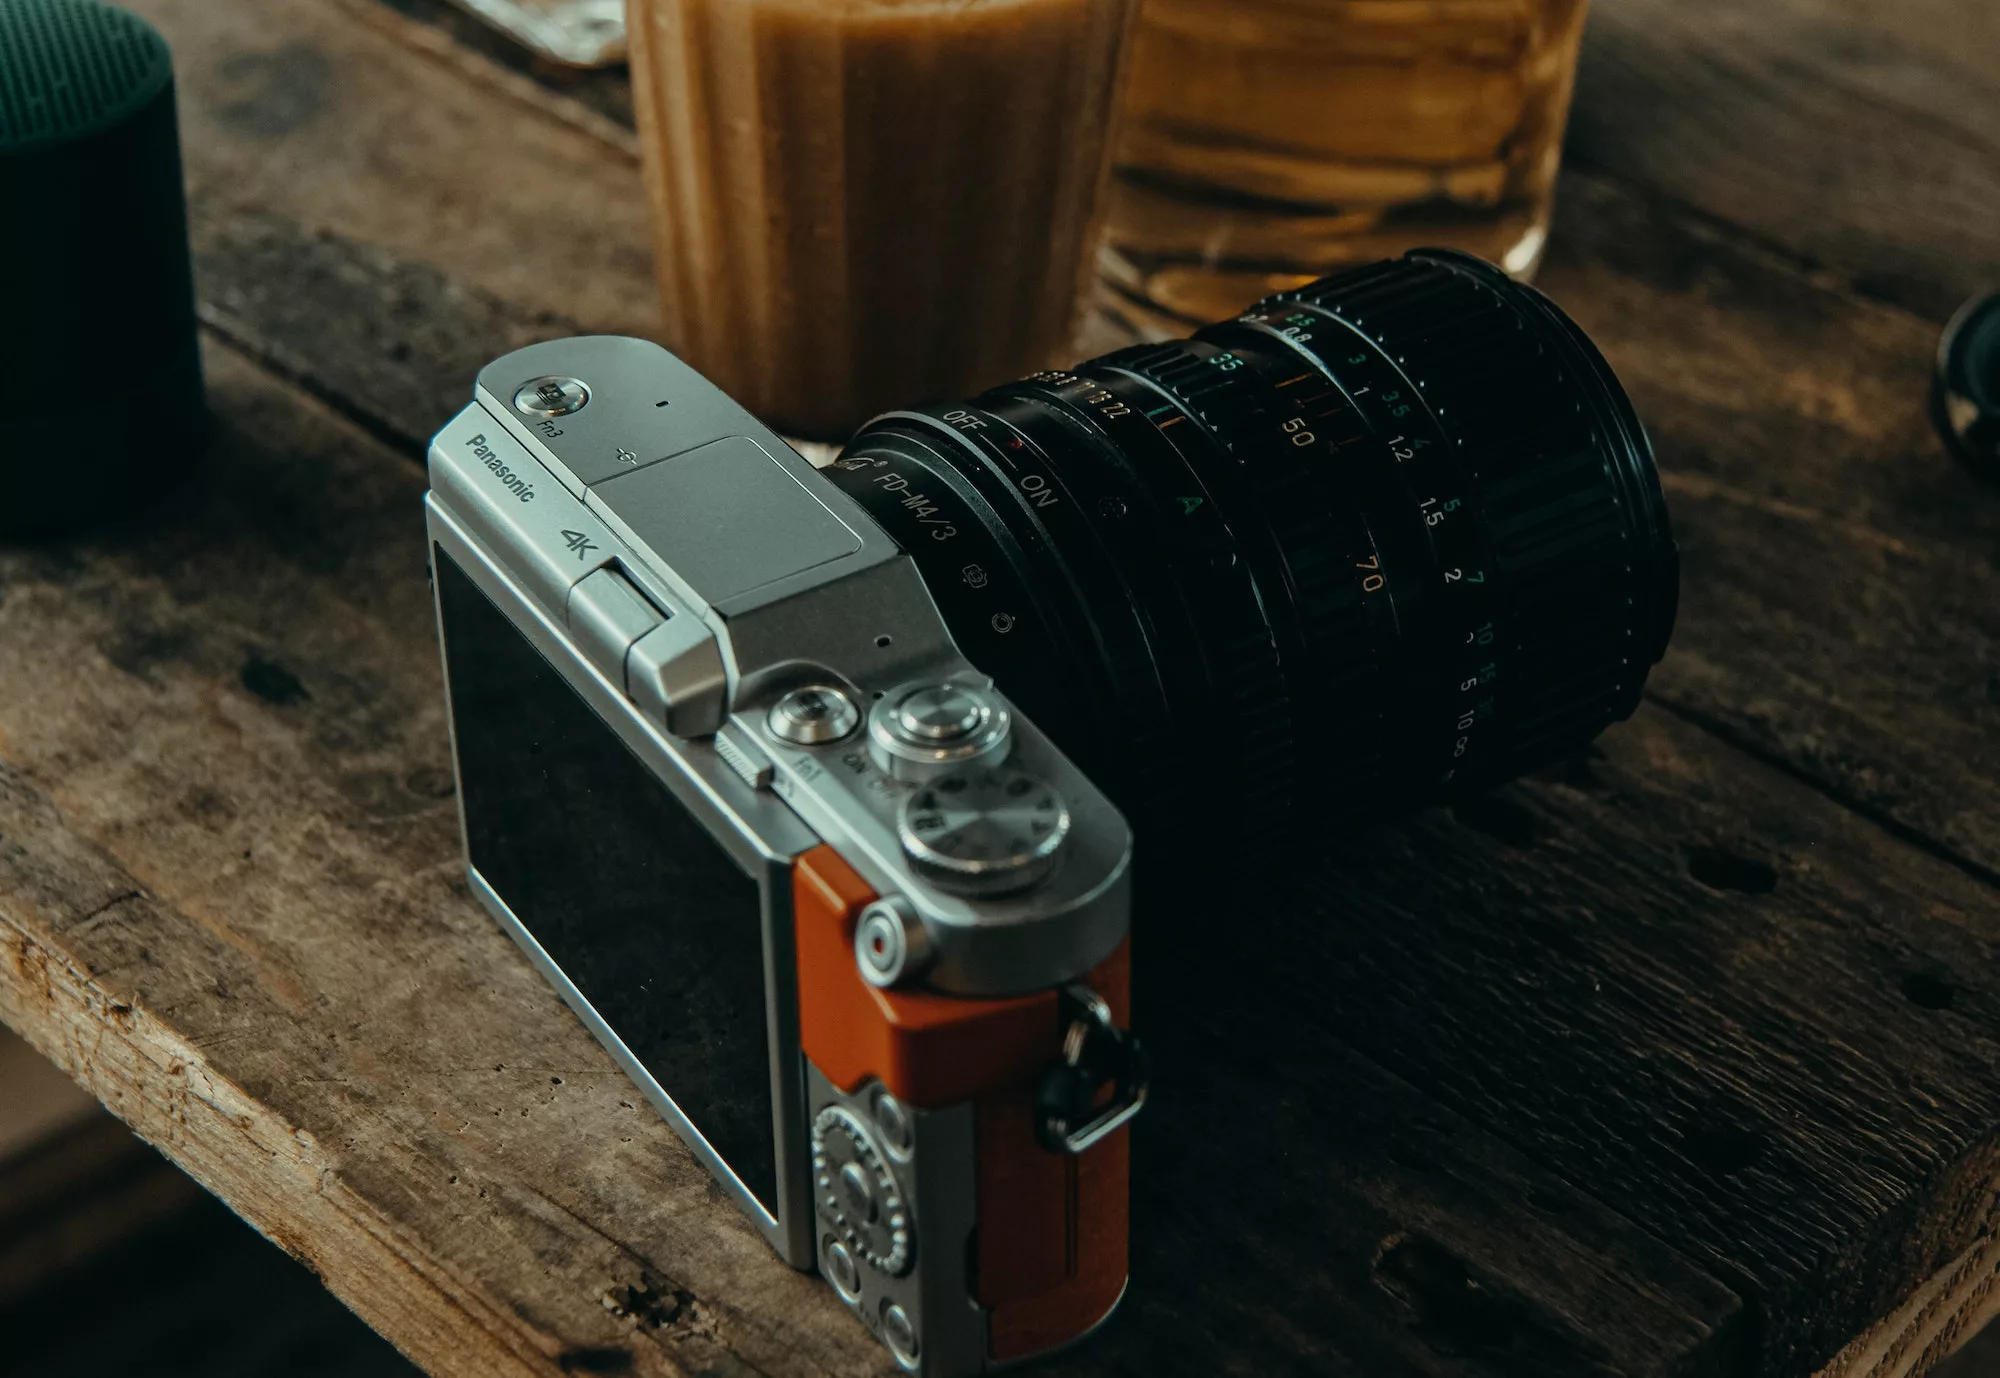 dslr camera on a wooden surface